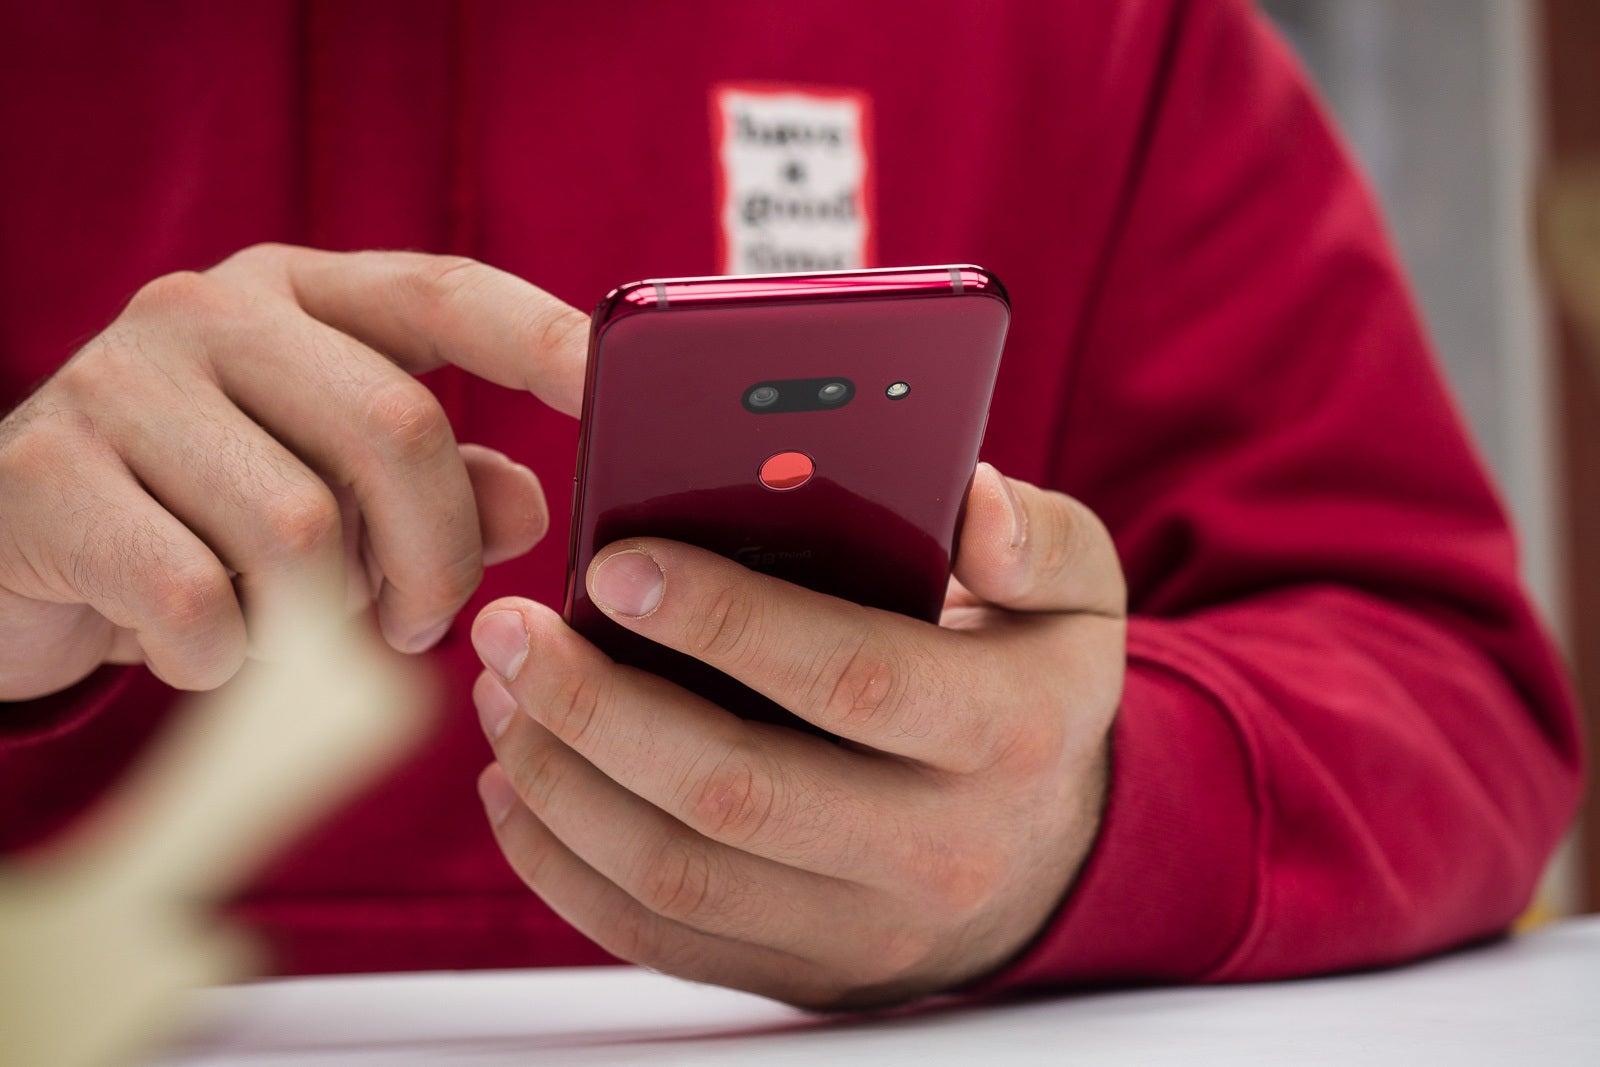 LG's mobile division lost over $850 million in 2019 as sales plunged